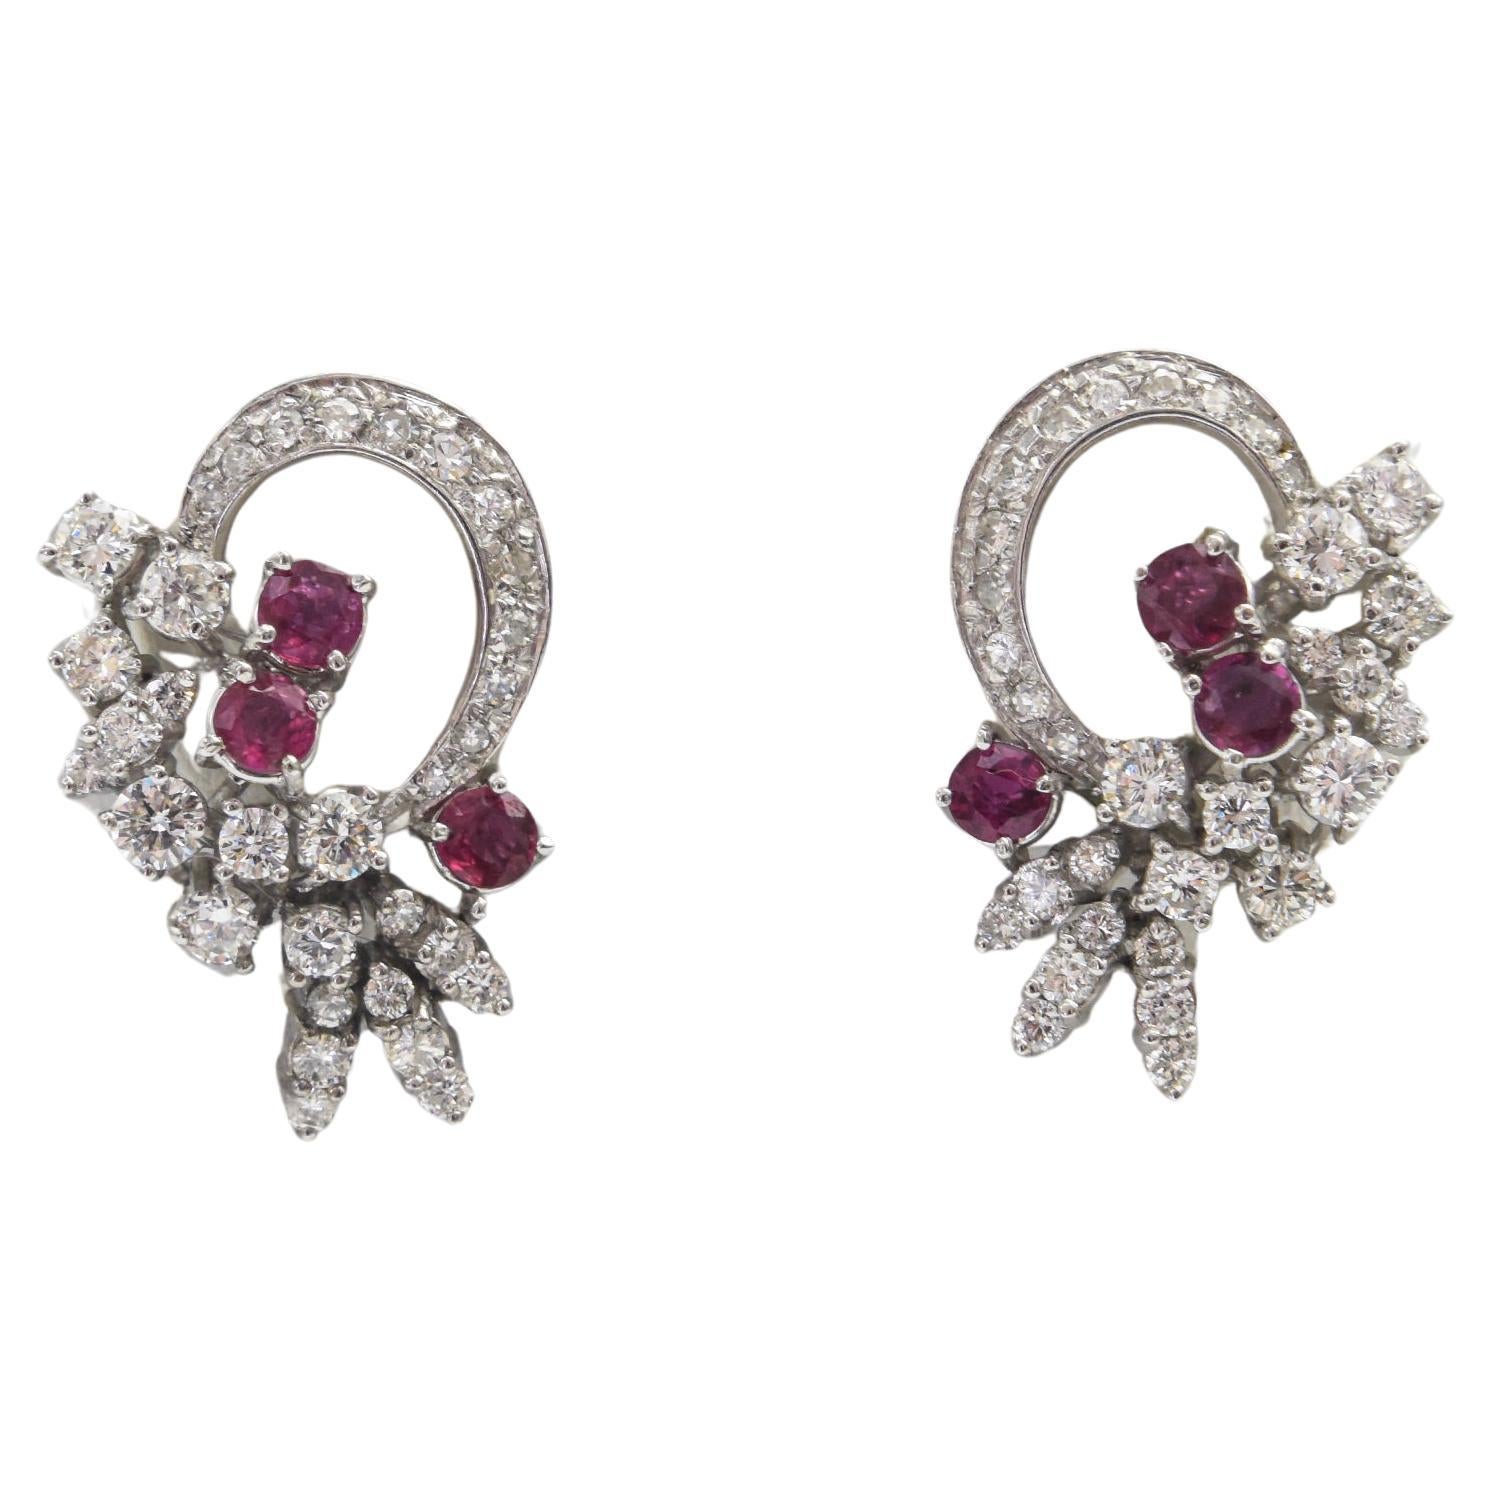 Mid 20th Century Diamond and Ruby Spray White Gold Earrings For Sale